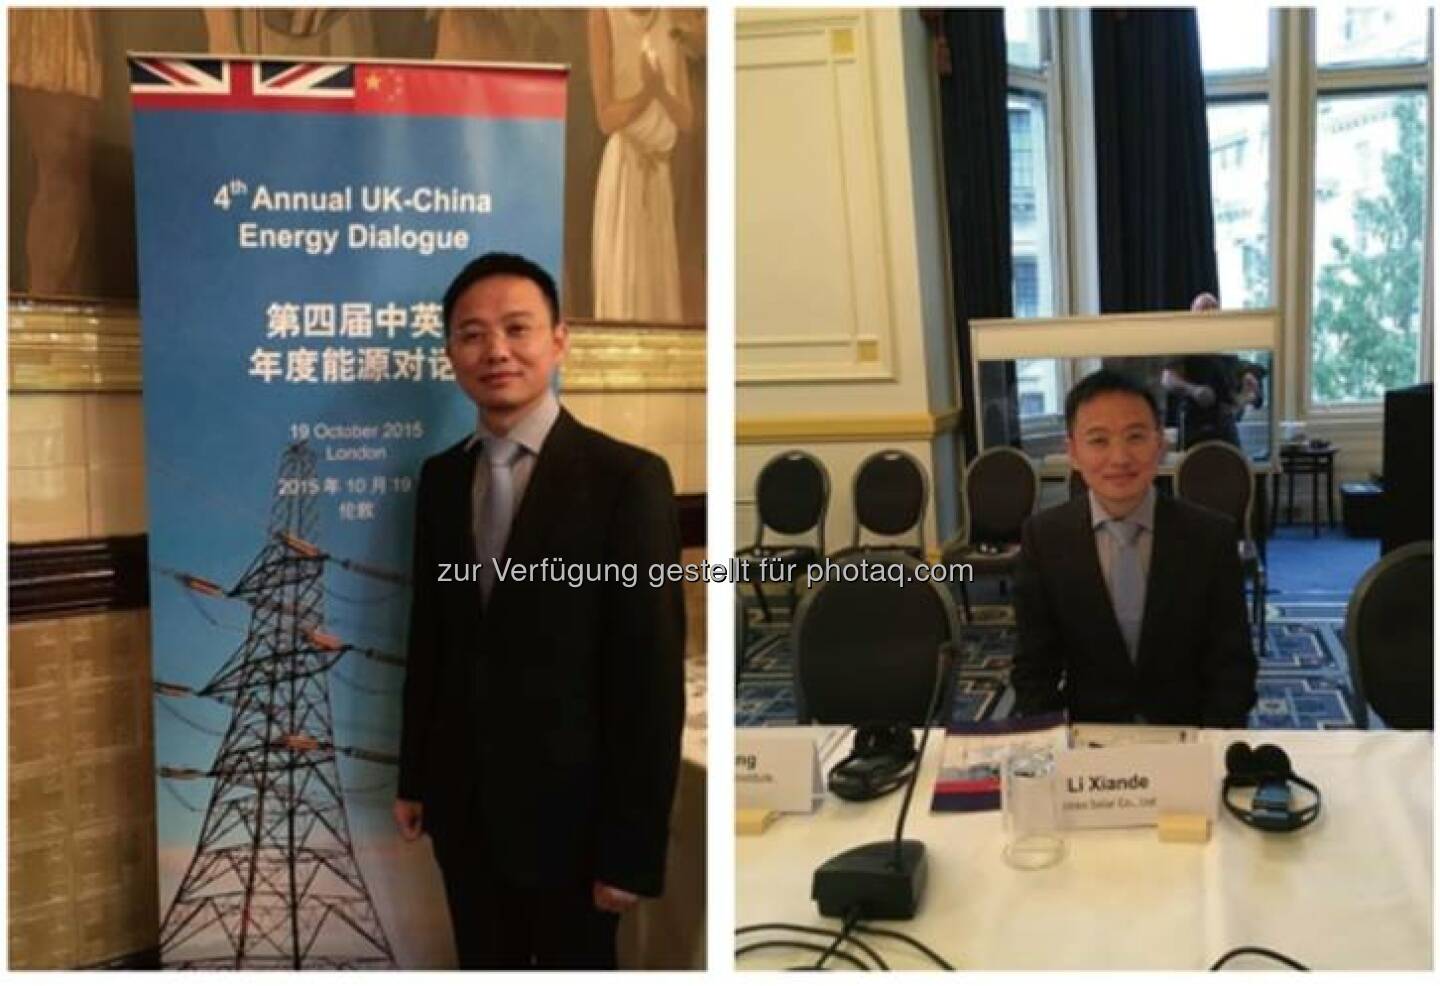 Jinko Solar’s chairman Xiande Li is accompanying the president of China Xi Jinping as one of the Chinese PV entrepreneur delegates today during his UK visit. Mr. Li will participate in the “Sino-UK Energy Dialogue” in London, held by Noor Bekri, Head of Chinese Energy Bureau and Amber Rudd, Secretary of State for Energy and Climate Change. The “Sino-UK Energy Dialogue” aims to facilitate the communication and understanding in the renewable energy section between China and UK, and prepare for the upcoming Paris Climate Summit. The chairman of Jinko Solar will deliver a speech about the current situation and future roadmap of solar PV.  Source: http://facebook.com/439664686151652